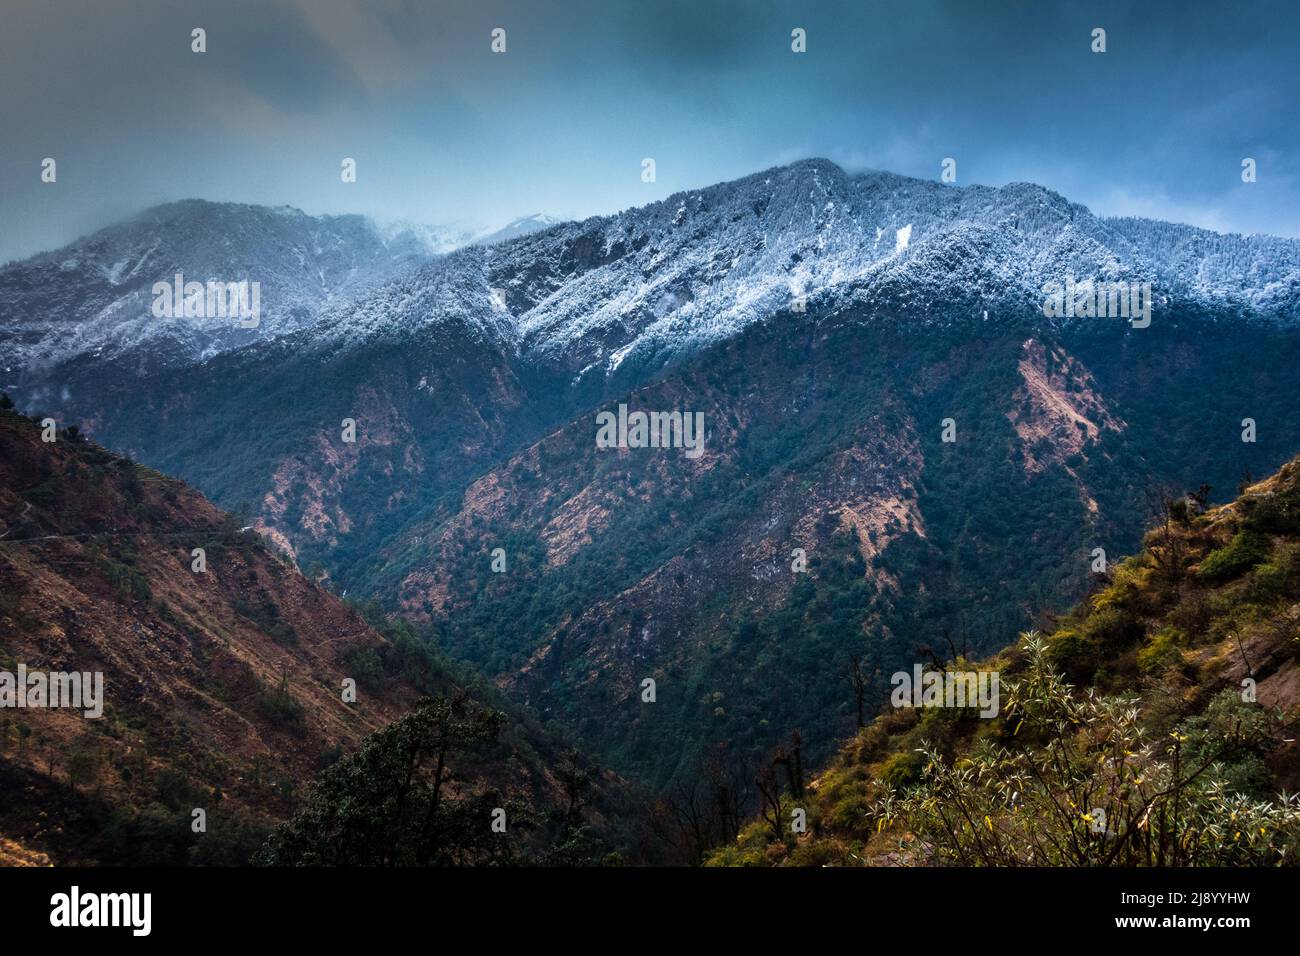 A beautiful shot of Snow covered mountains in the Okhimath district of Chamoli garhwal, Uttrakhand. India. Stock Photo